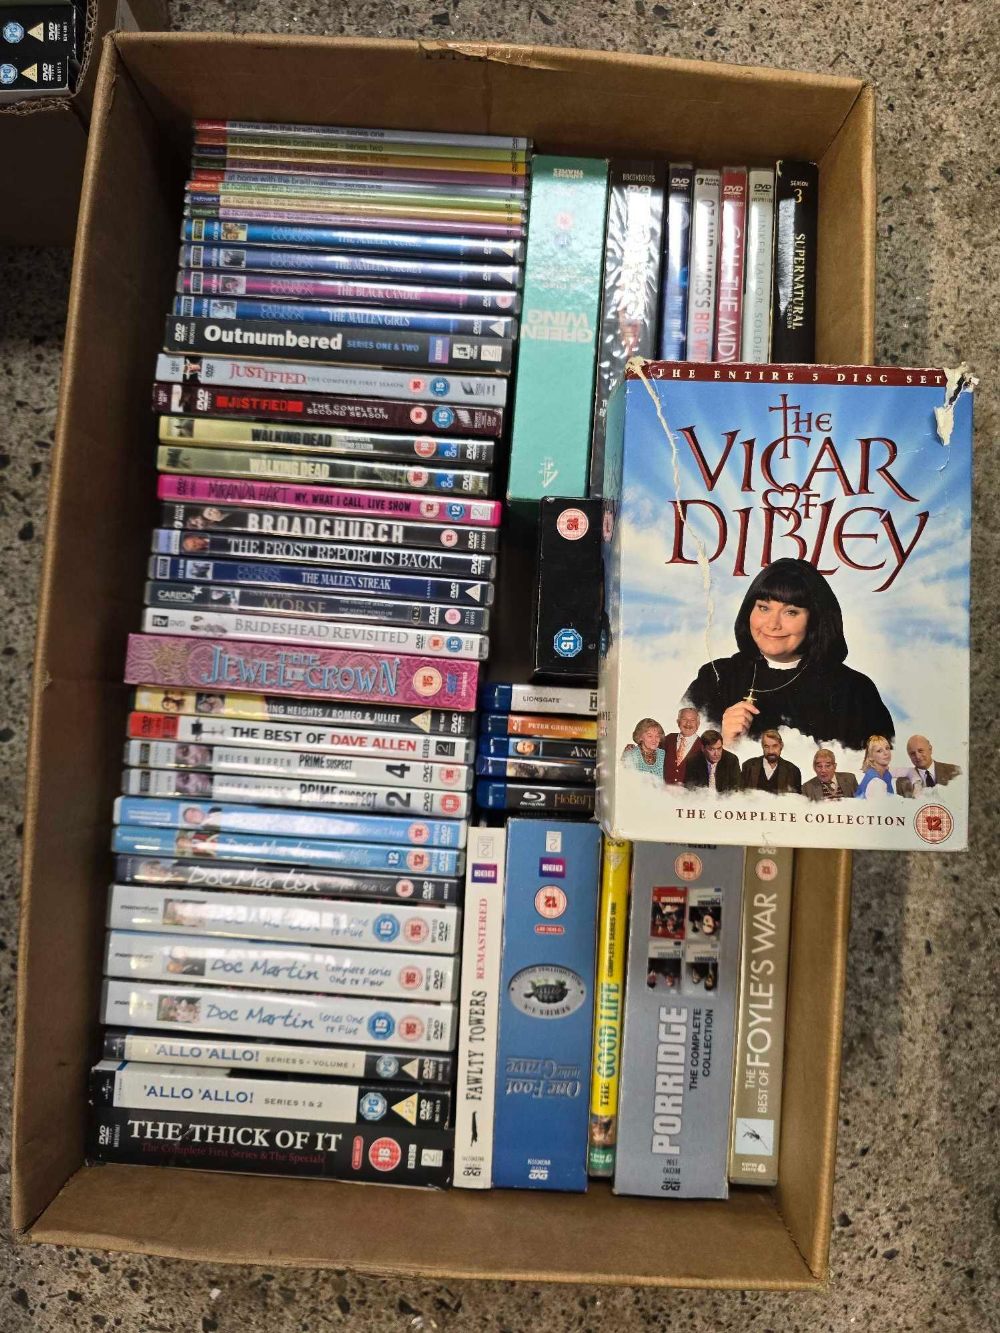 4 CRATES OF CD'S BLUE RAYS DVD'S INCL;